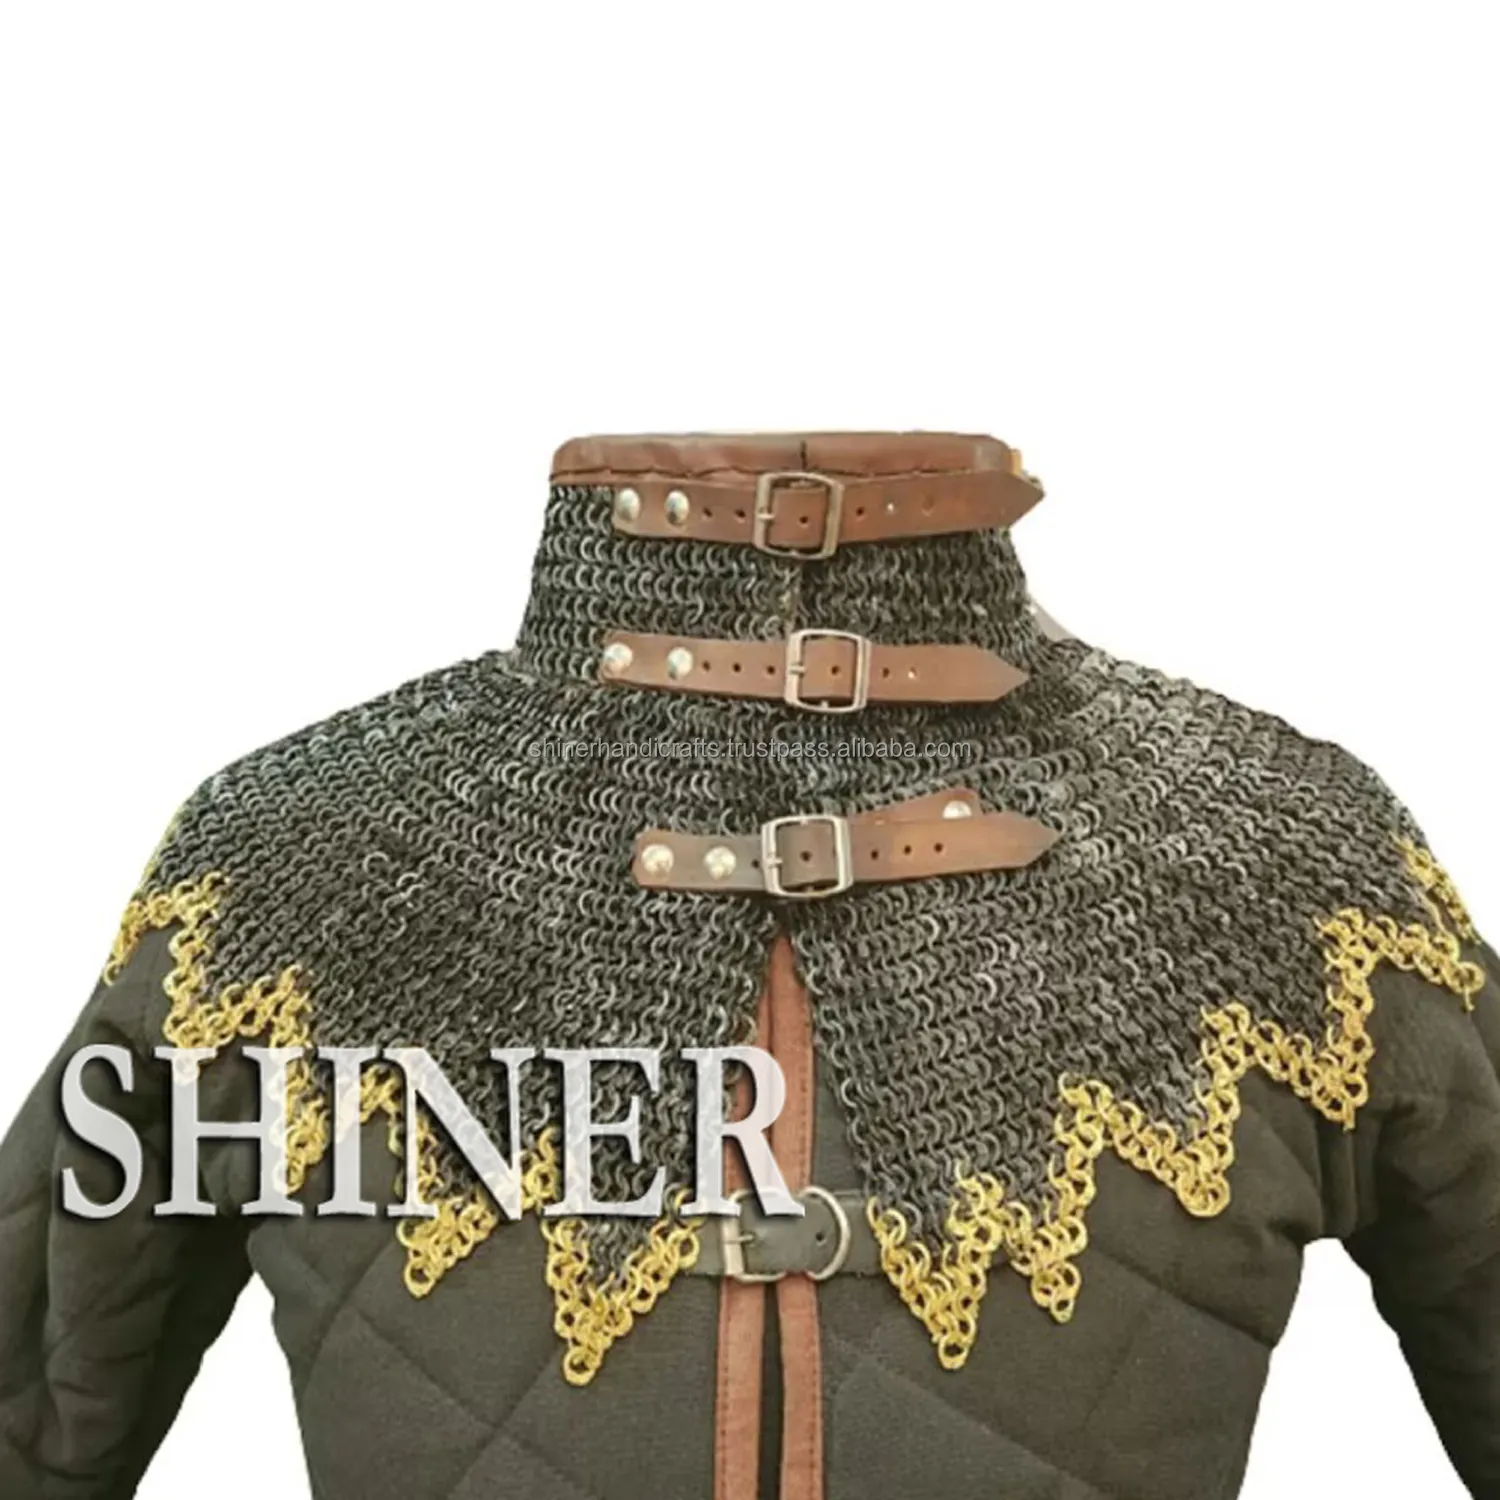 Chainmail Coif Aluminum V-Neck | Chain Mail Hood Armor Costume Medieval Gorget| Armour SCA Reenactment Cosplay Black & Brass